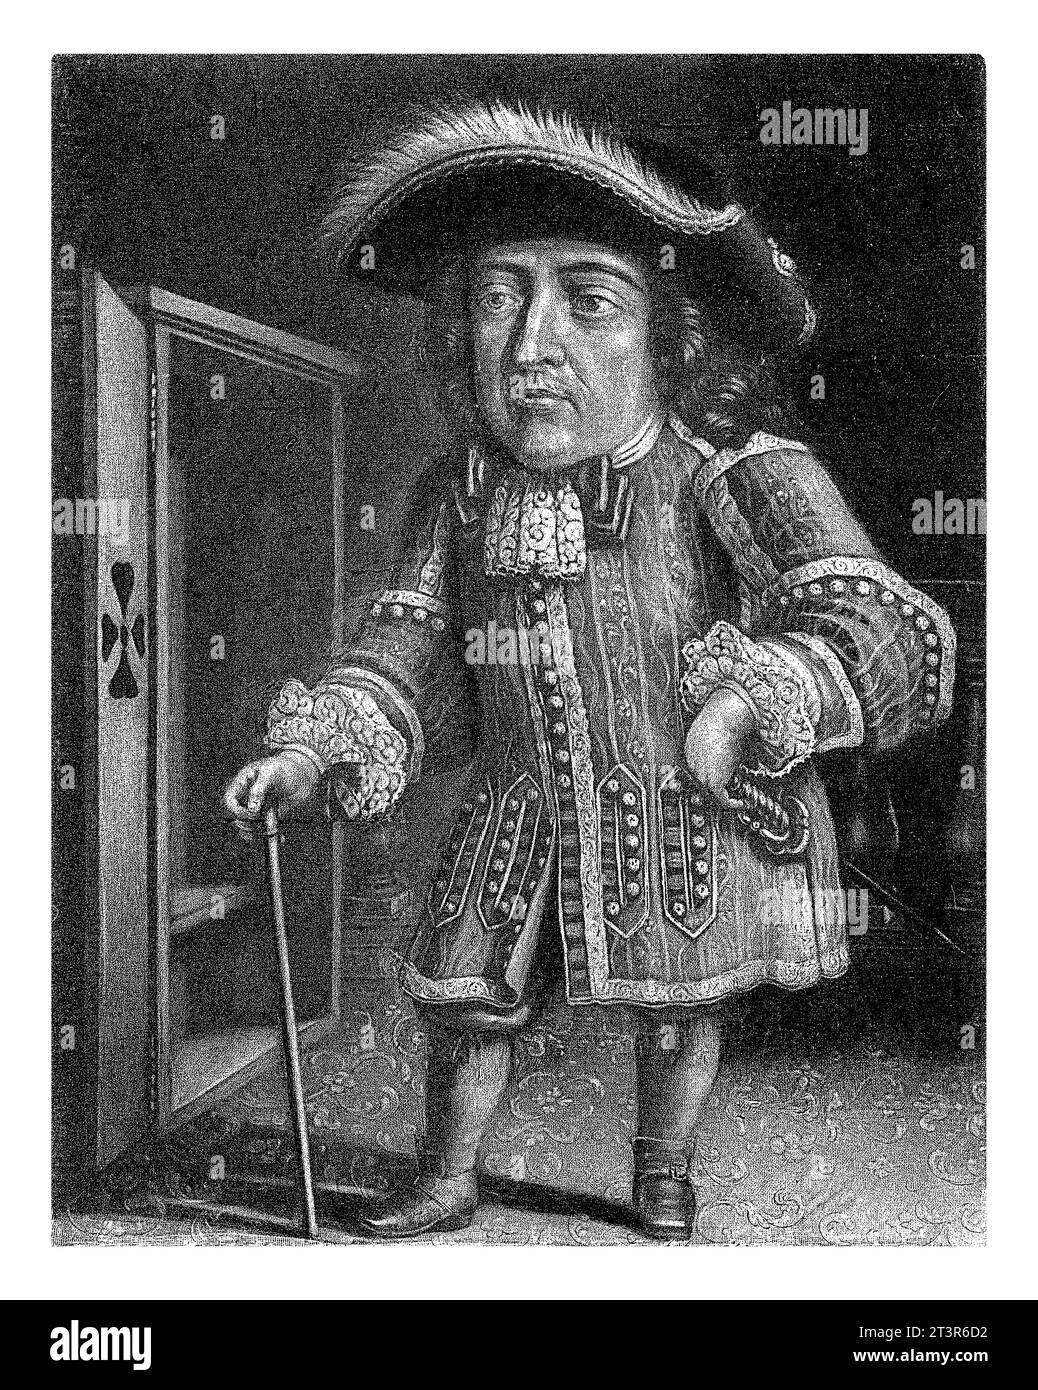 Portrait of John Skinner, Jacob Gole, 1670 - 1724 The English dwarf John Skinner at the age of 35. He was born in 1663 in Plymouth. In the margin are Stock Photo